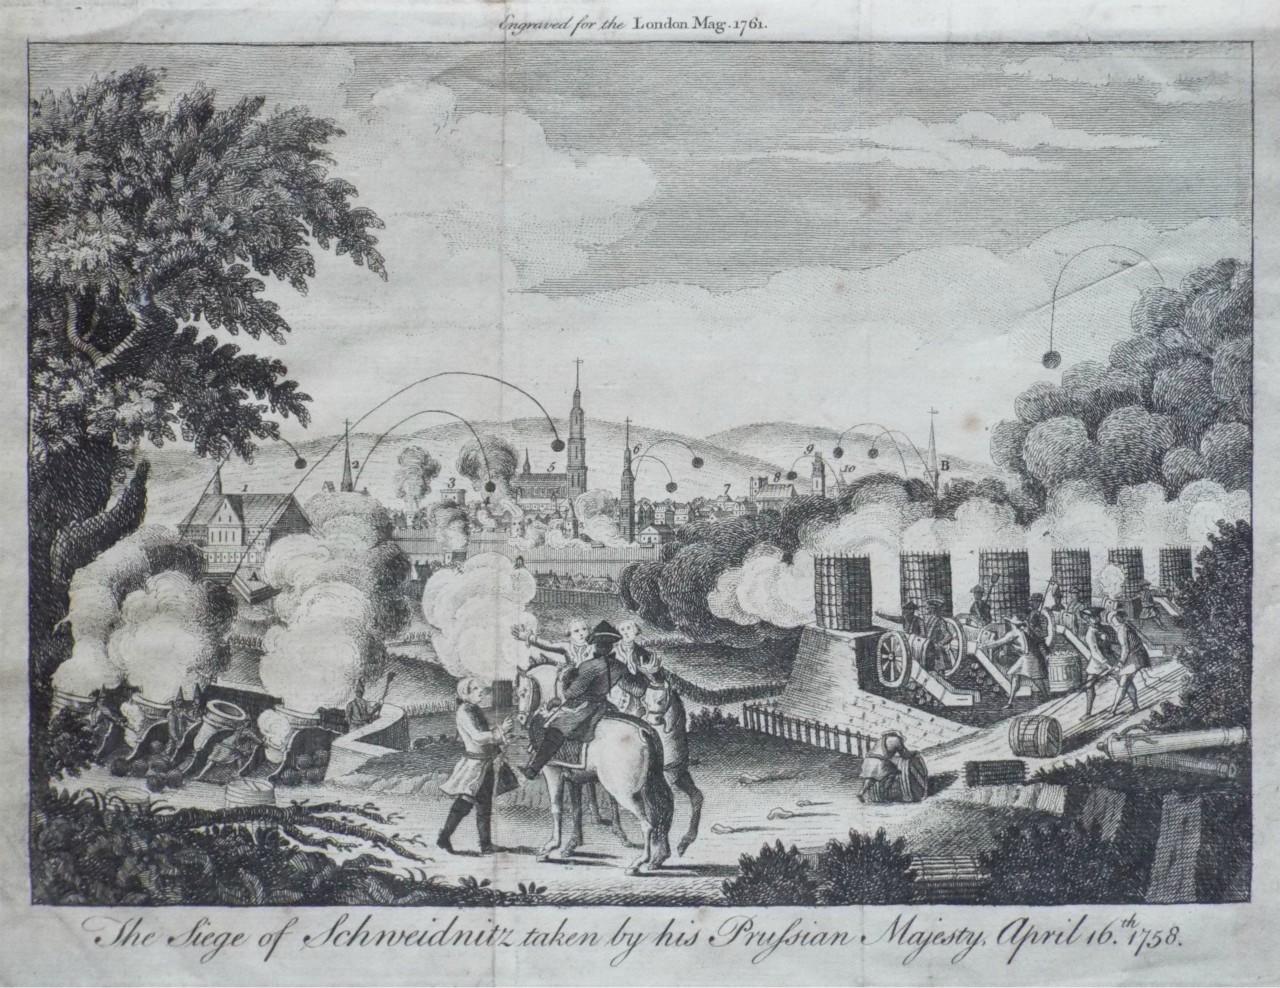 Print - The Siege of Schweidnitz taken by his Prussian Majesty, April 16th 1758.